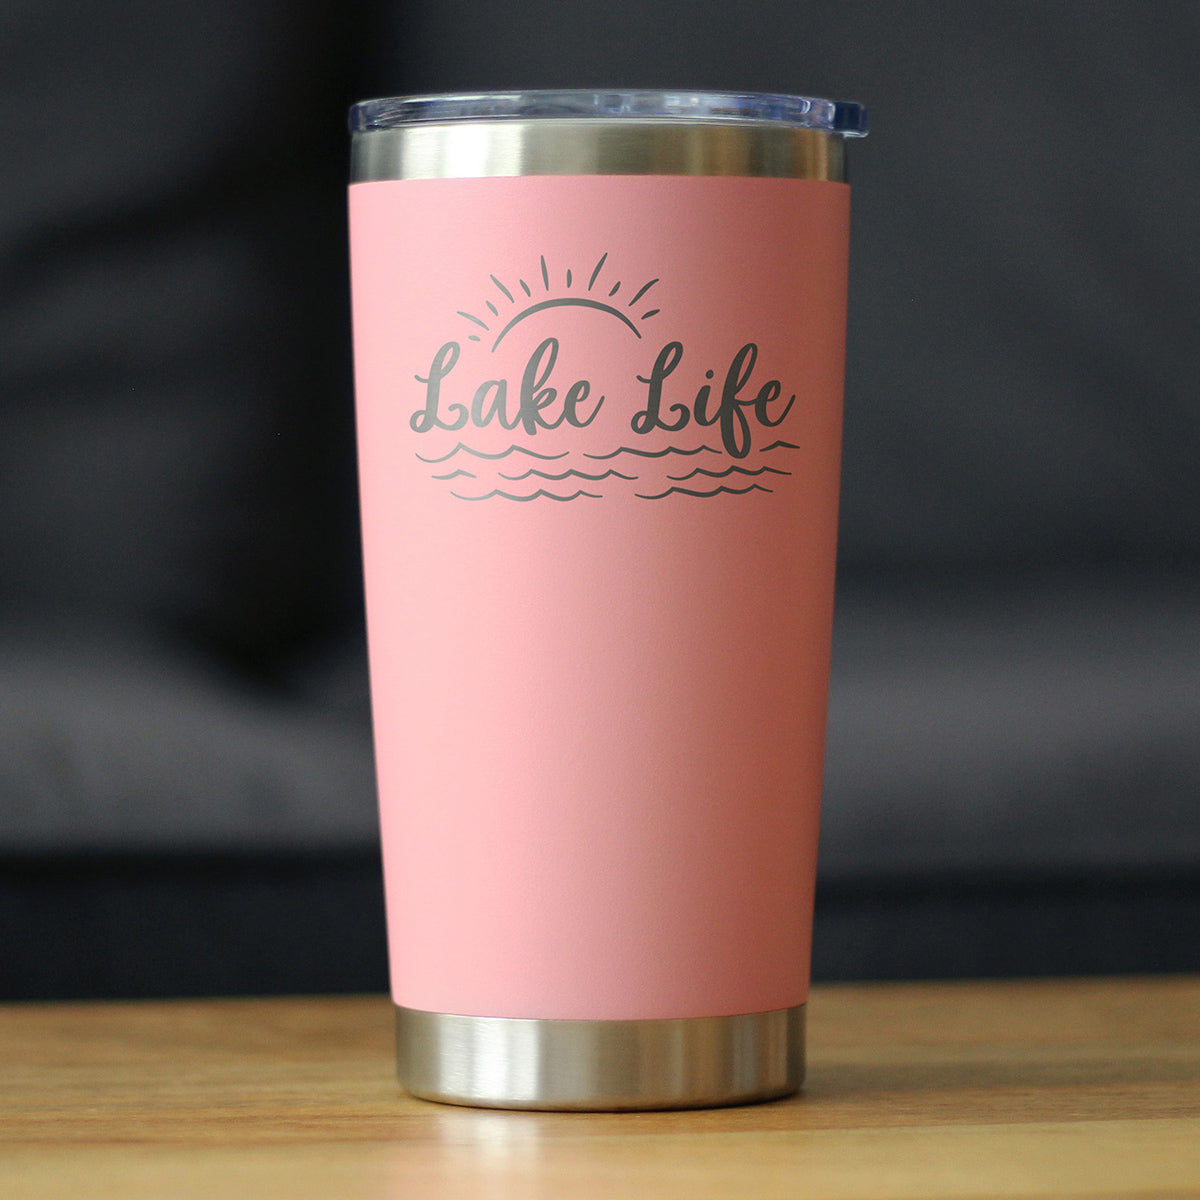 Lake Life - Insulated Coffee Tumbler Cup with Sliding Lid - Stainless Steel Insulated Mug - Cute Outdoor Camping Mug and Lake House Decor